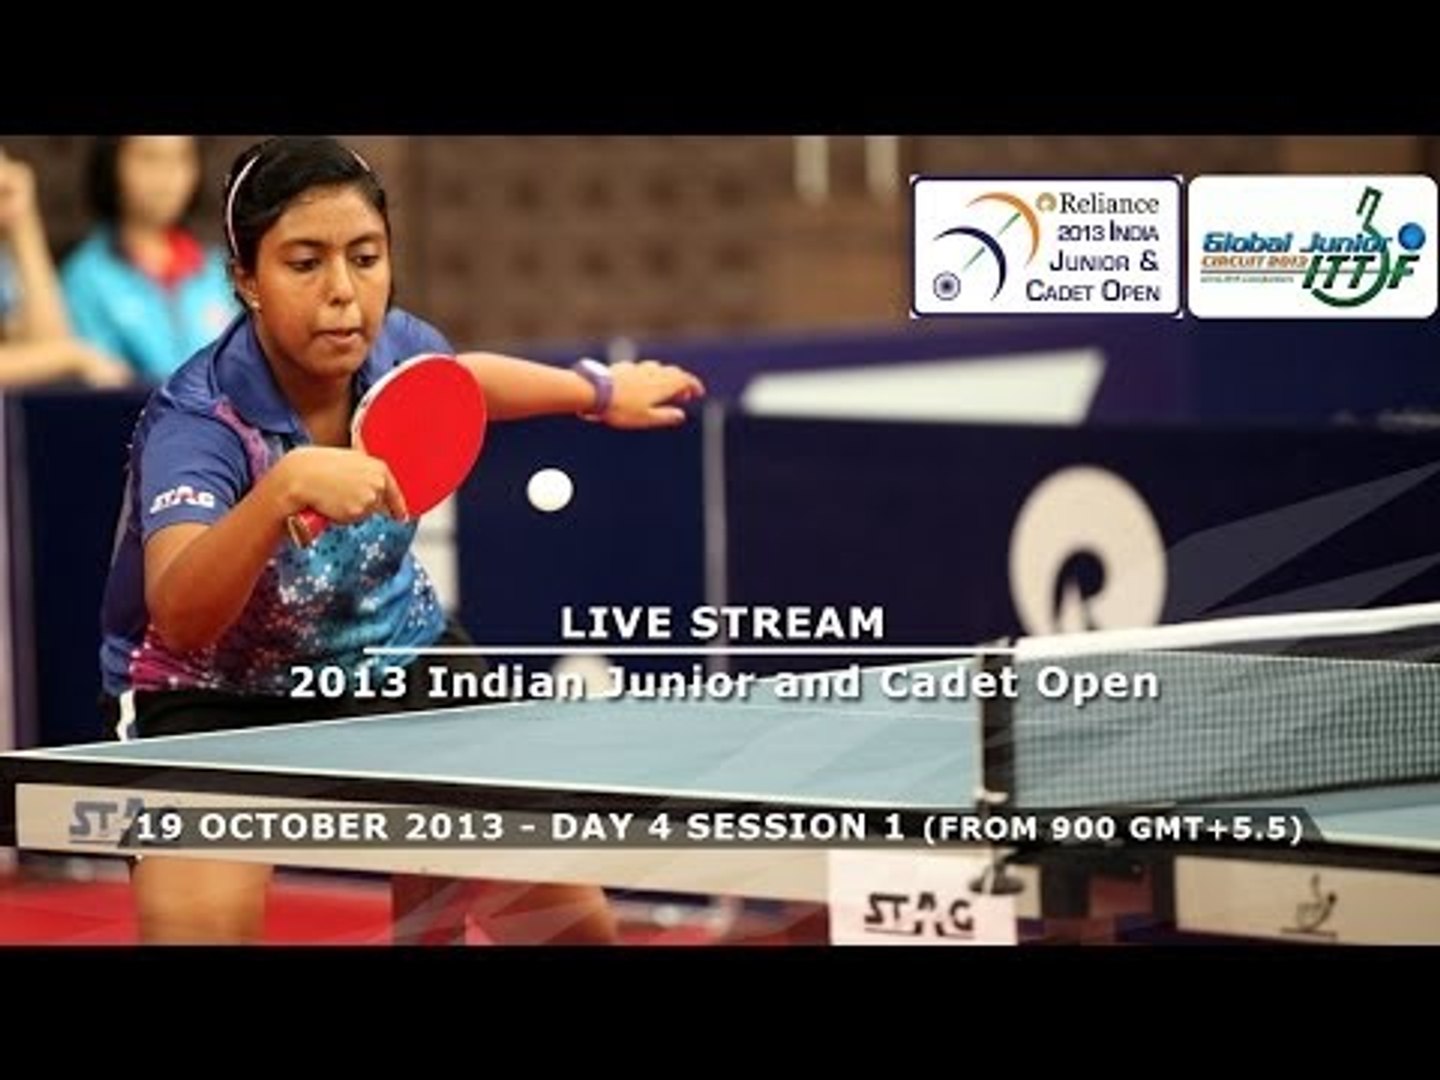 Reliance 2013 Indian Junior and Cadet Open - Day 4 Morning Session